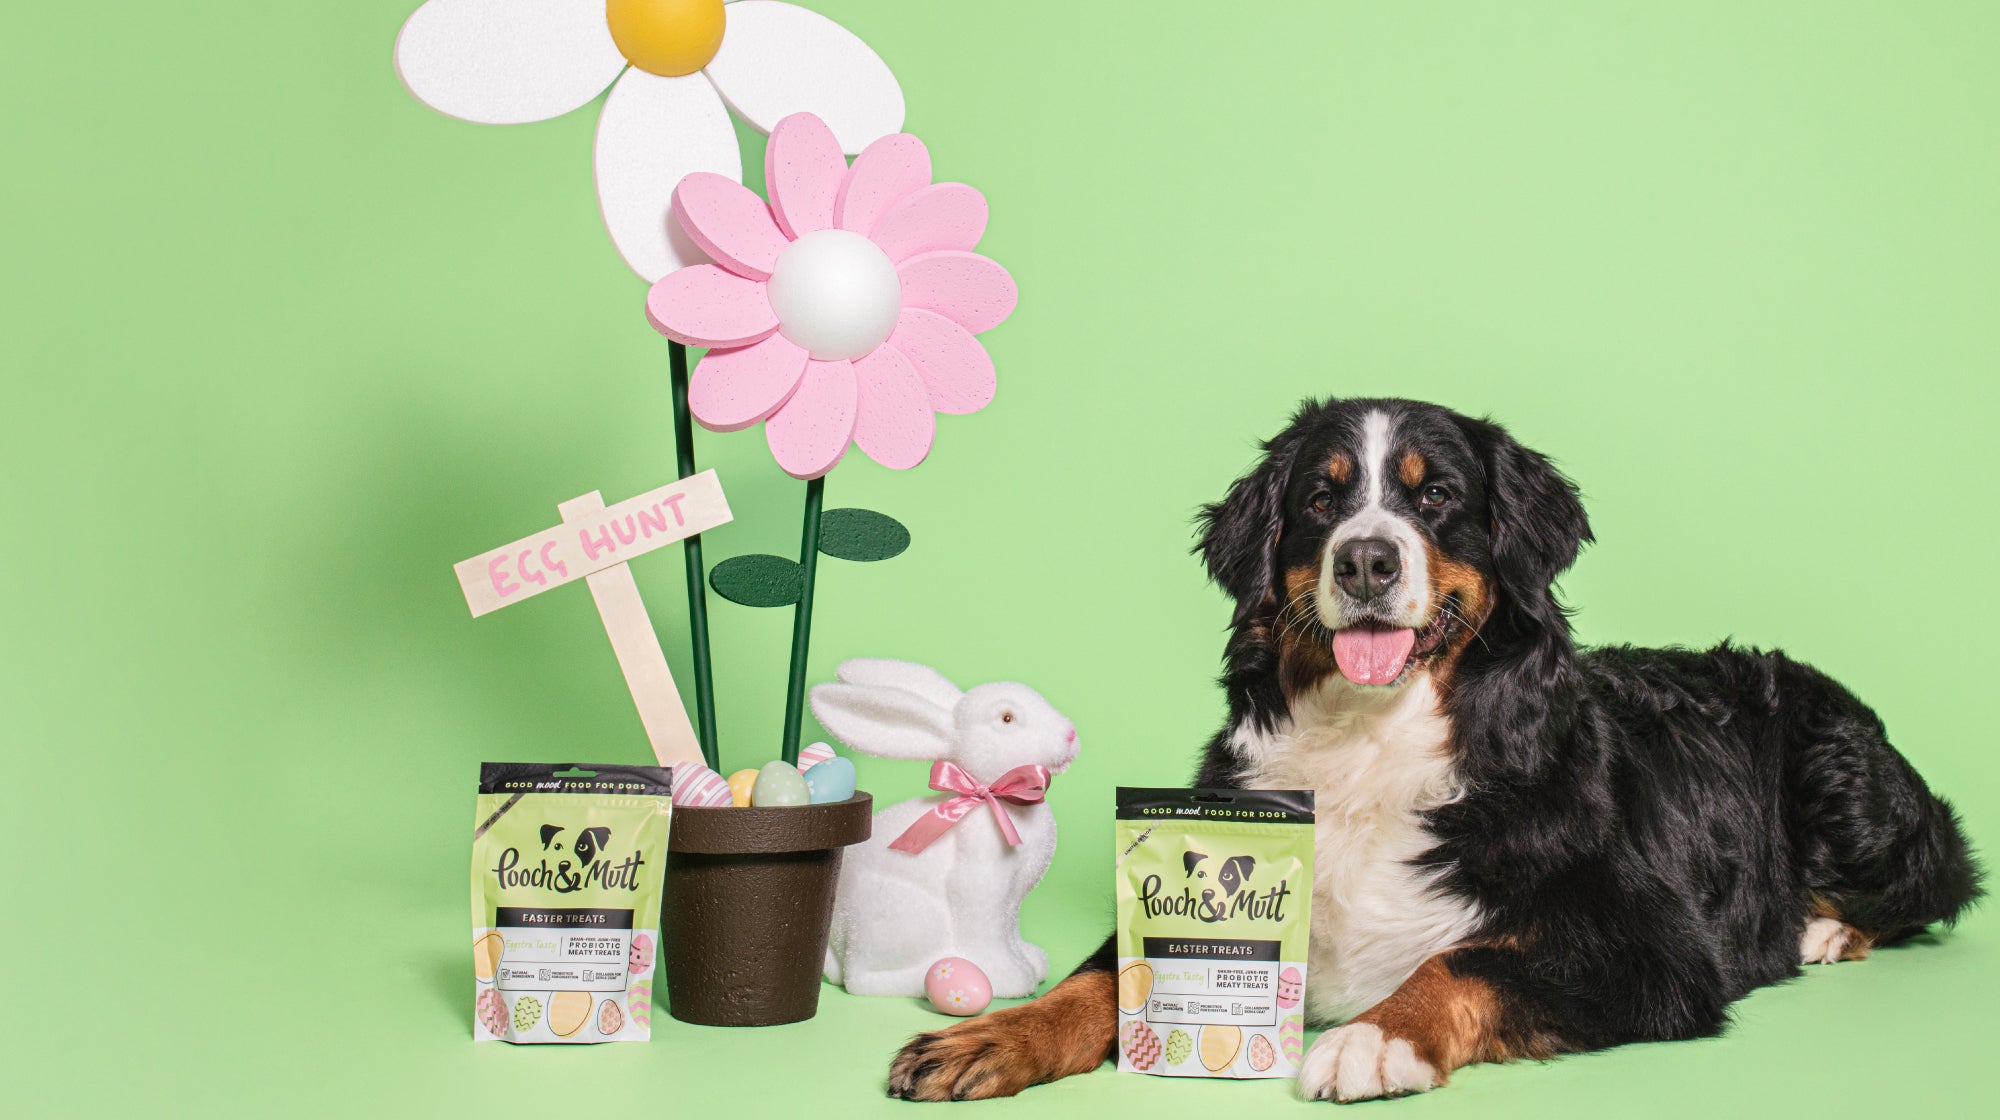 dog sat next to easter treats on a green background